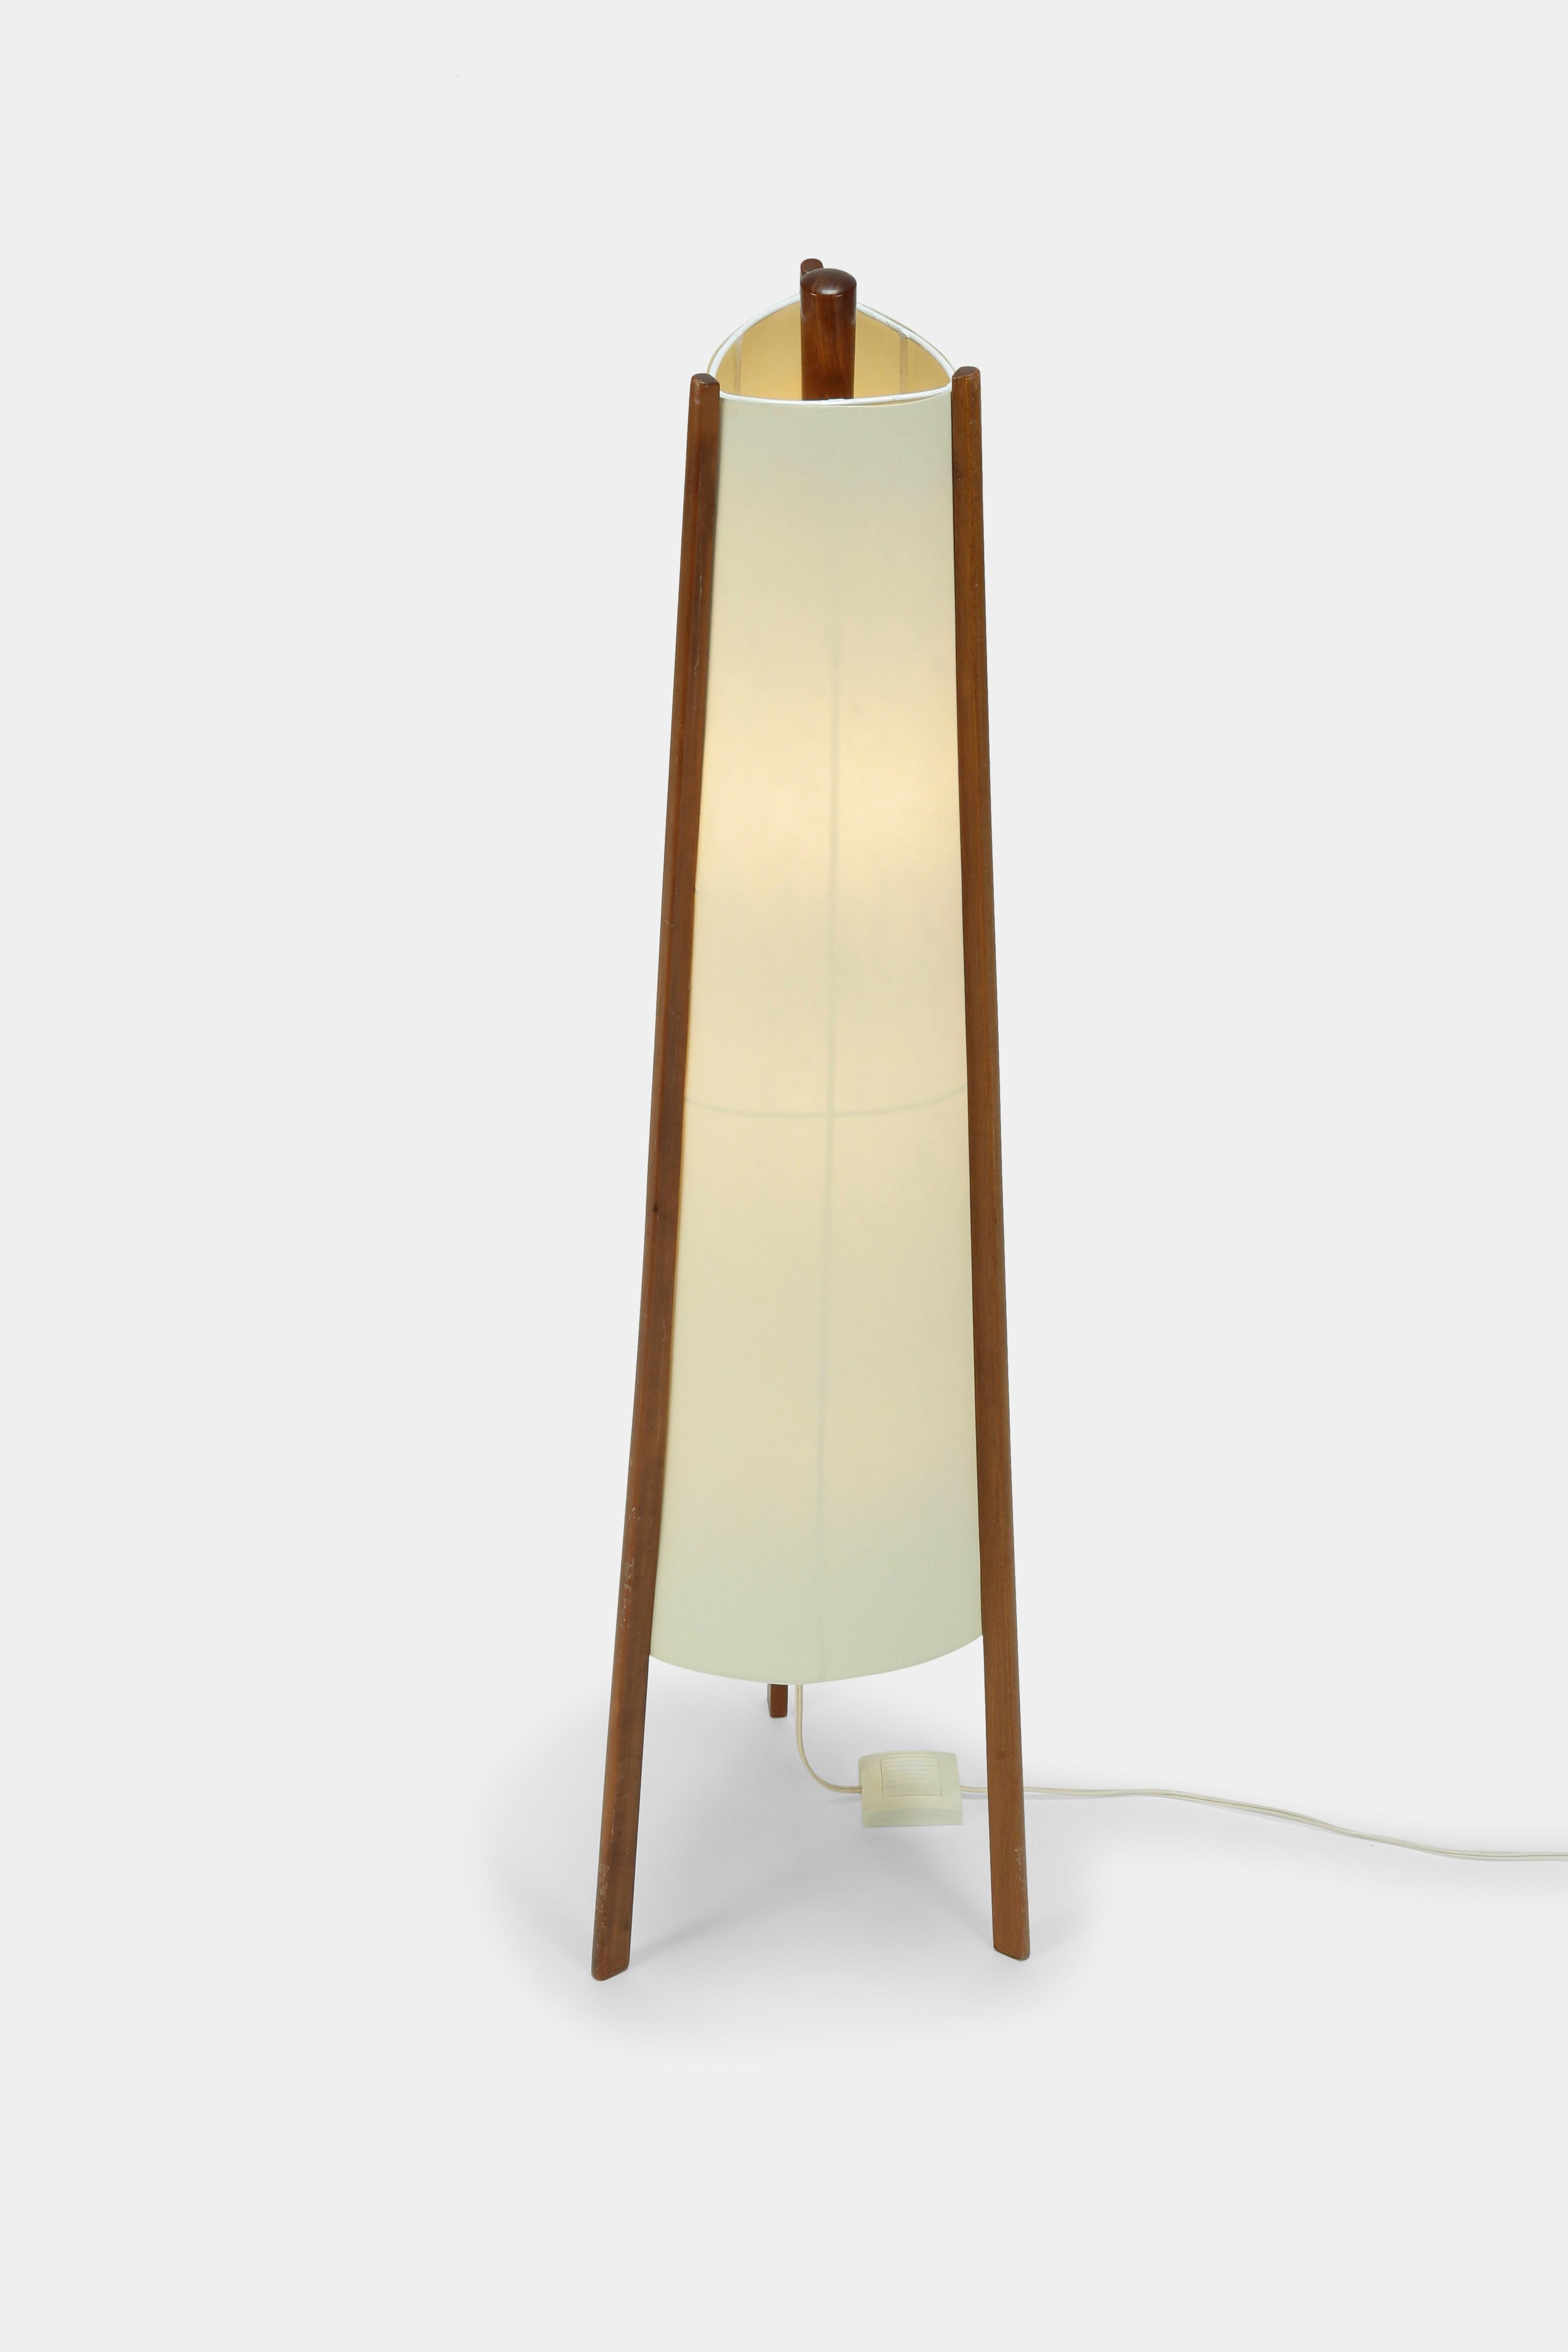 Swiss floor lamp manufactured in the 1950s. New parchment lamp shade attached to three pillars made of solid walnut wood. Generates a pleasant and warm atmosphere.
 